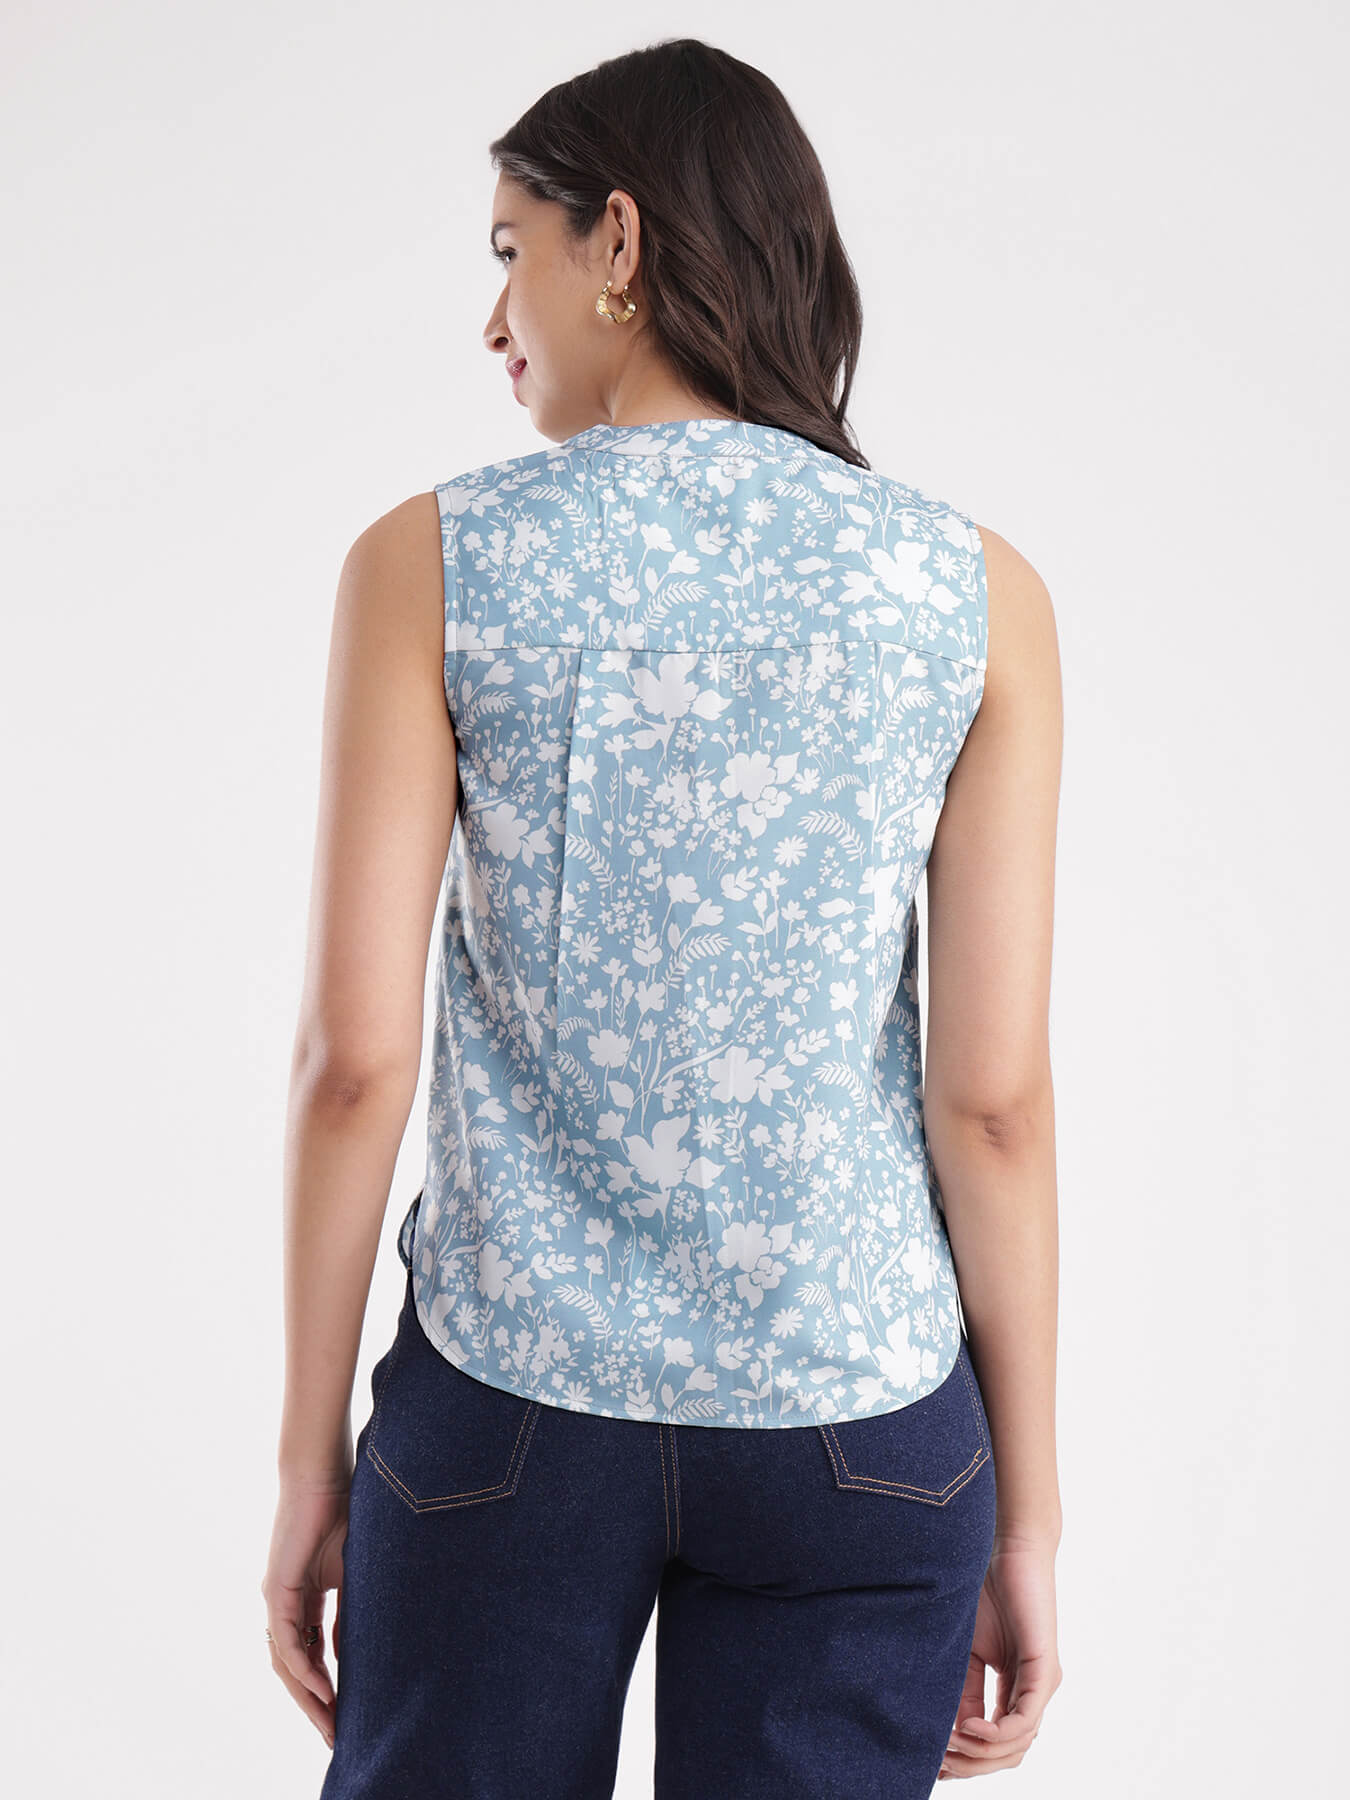 Floral Print Top - Blue And White